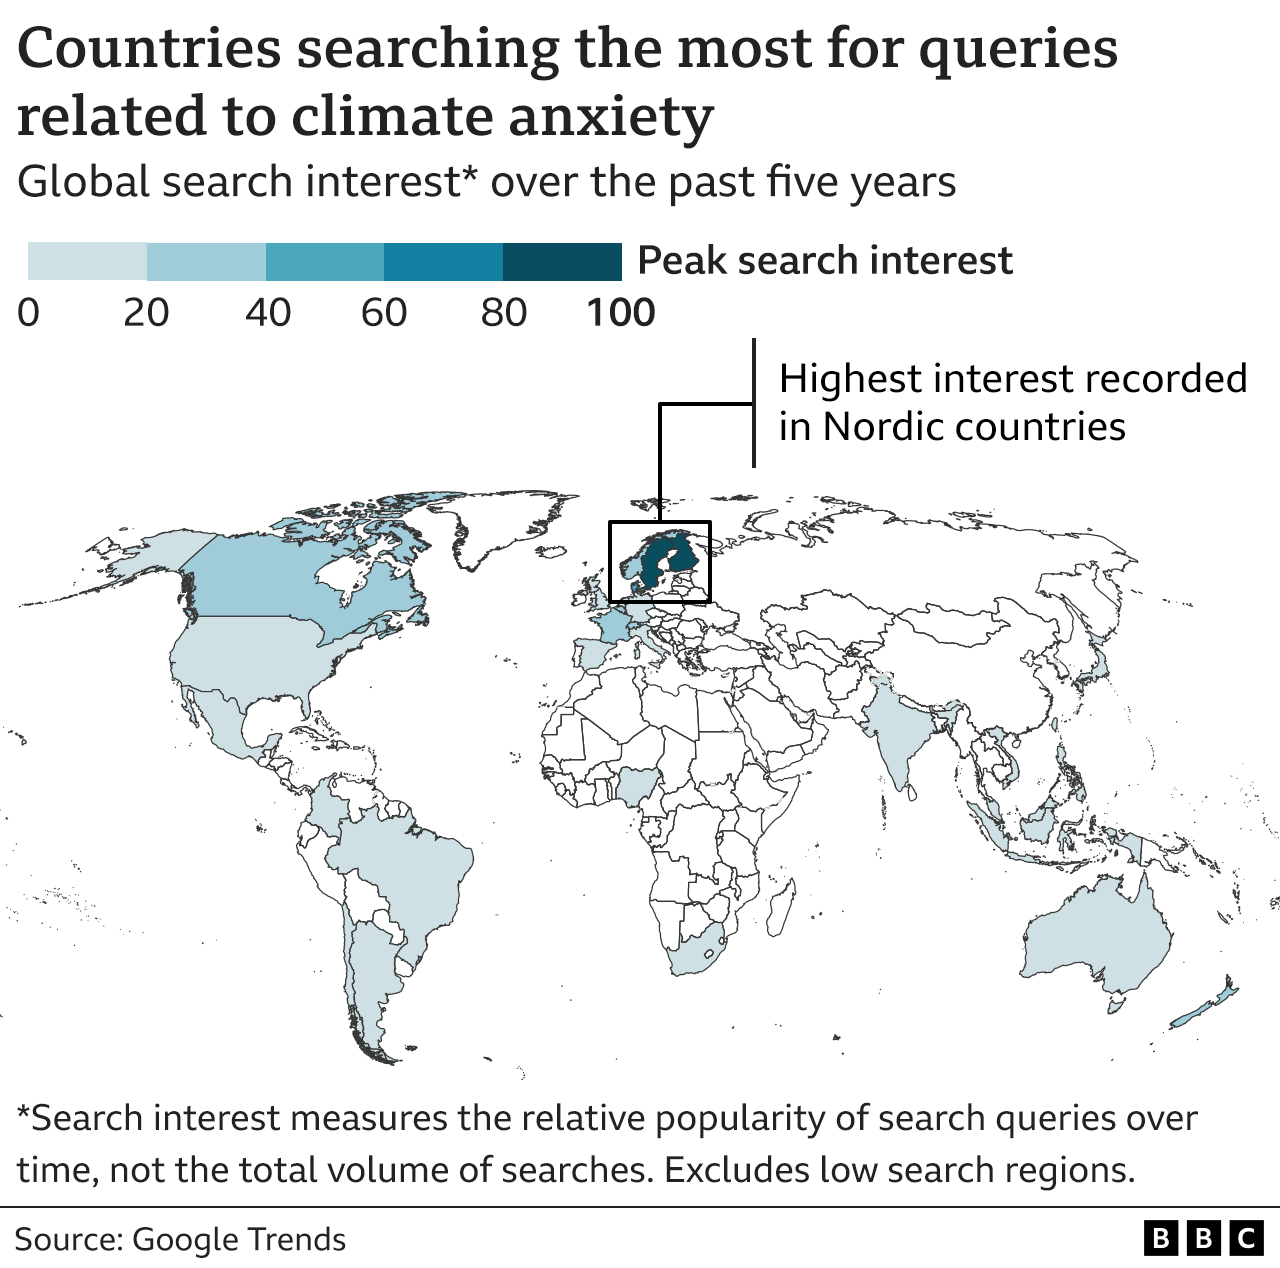 Map showing the different countries searching the most for queries related to climate anxiety